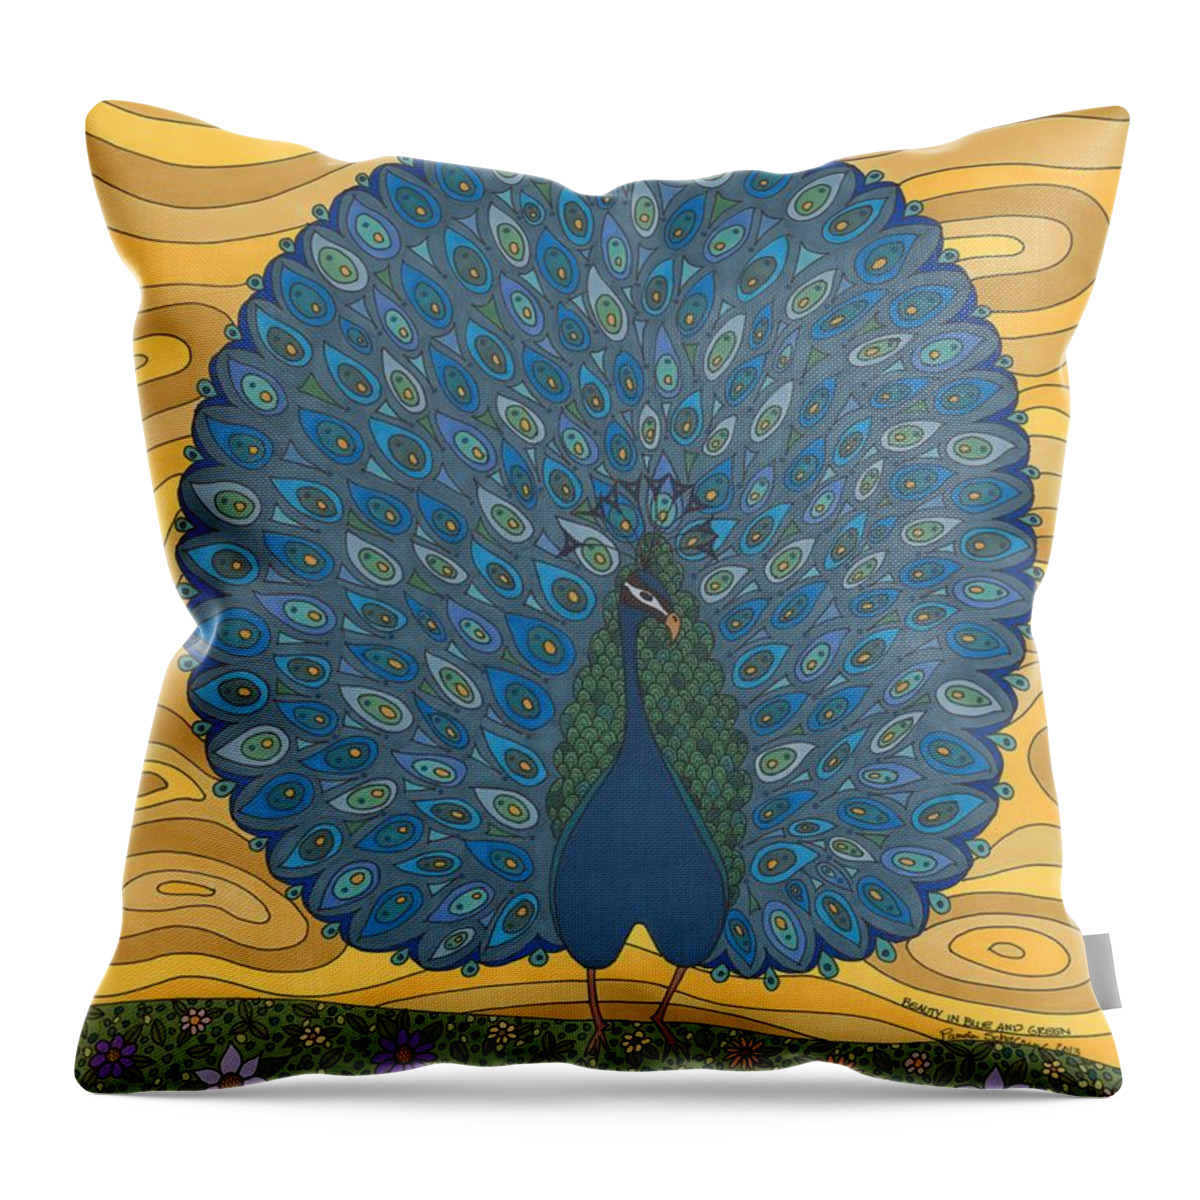 Peacock Throw Pillow featuring the drawing Beauty In Blue And Green by Pamela Schiermeyer